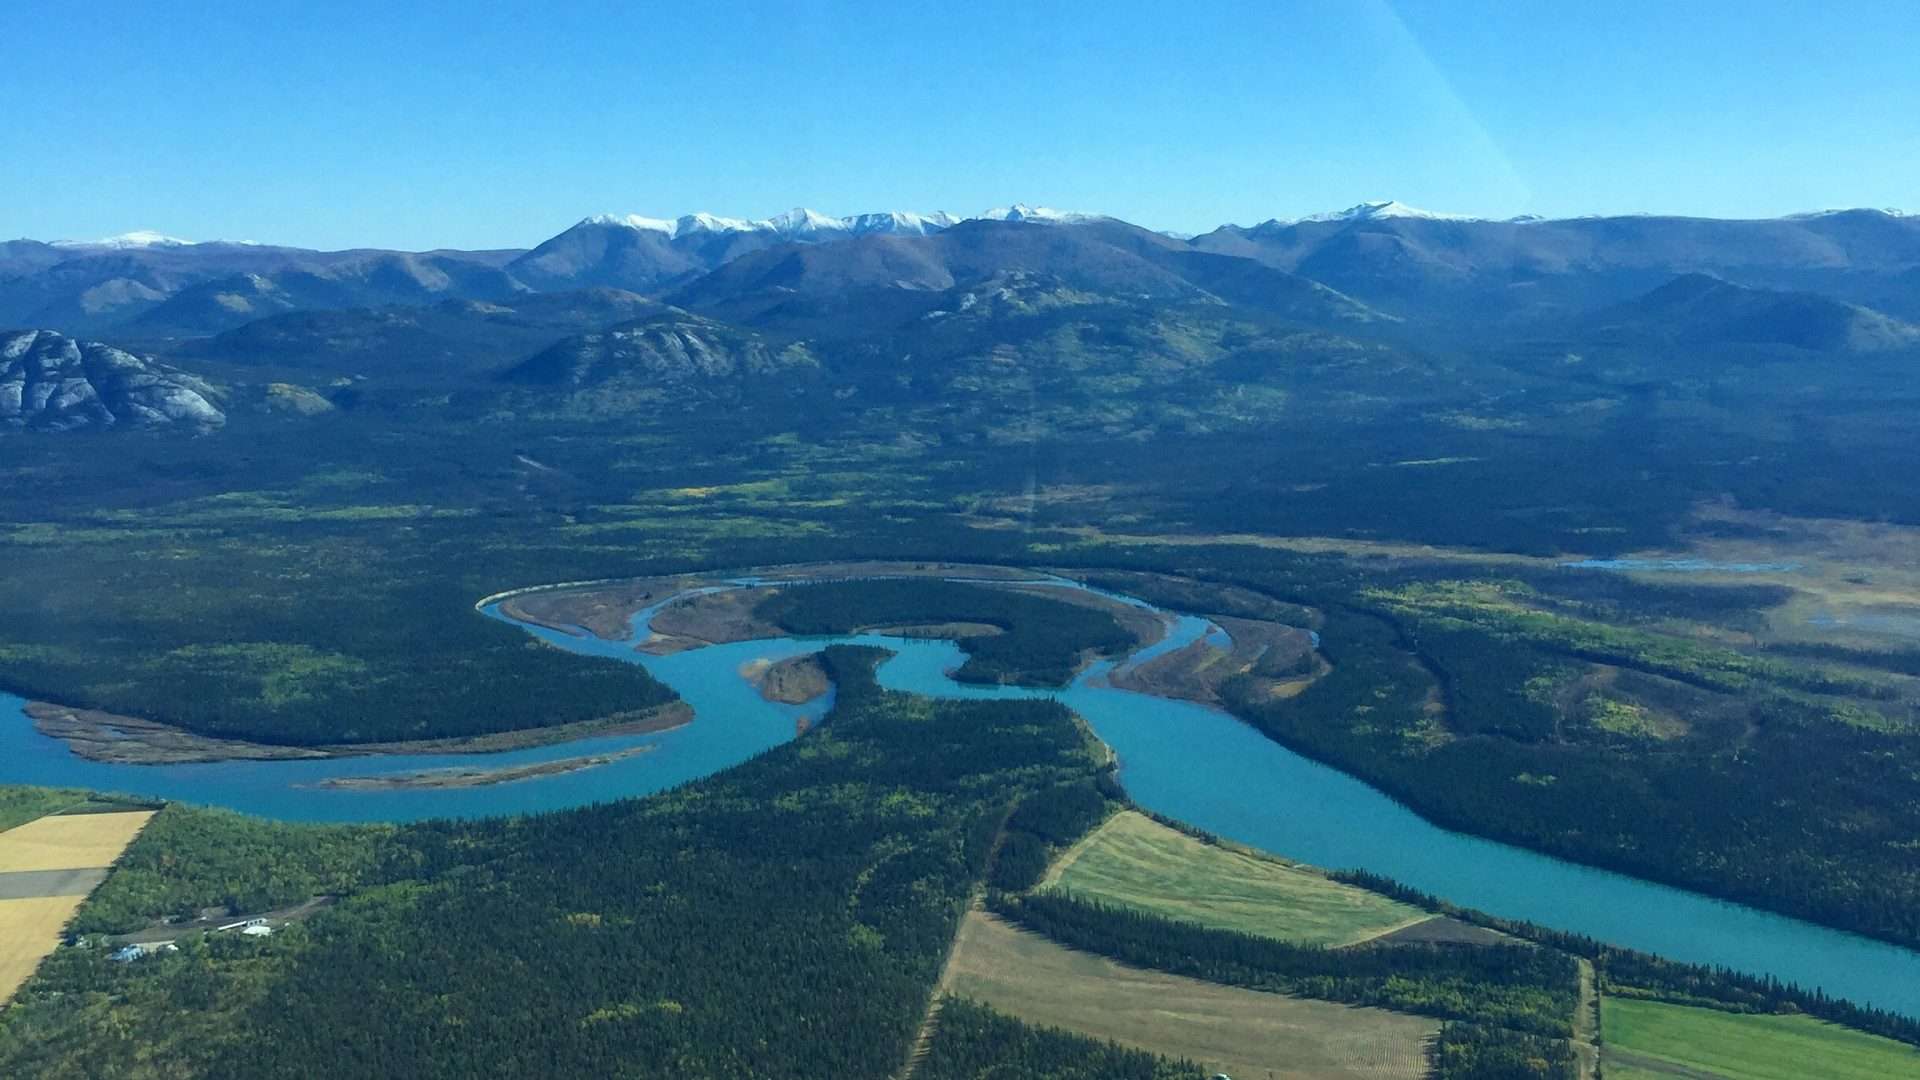 Whitehorse from the air